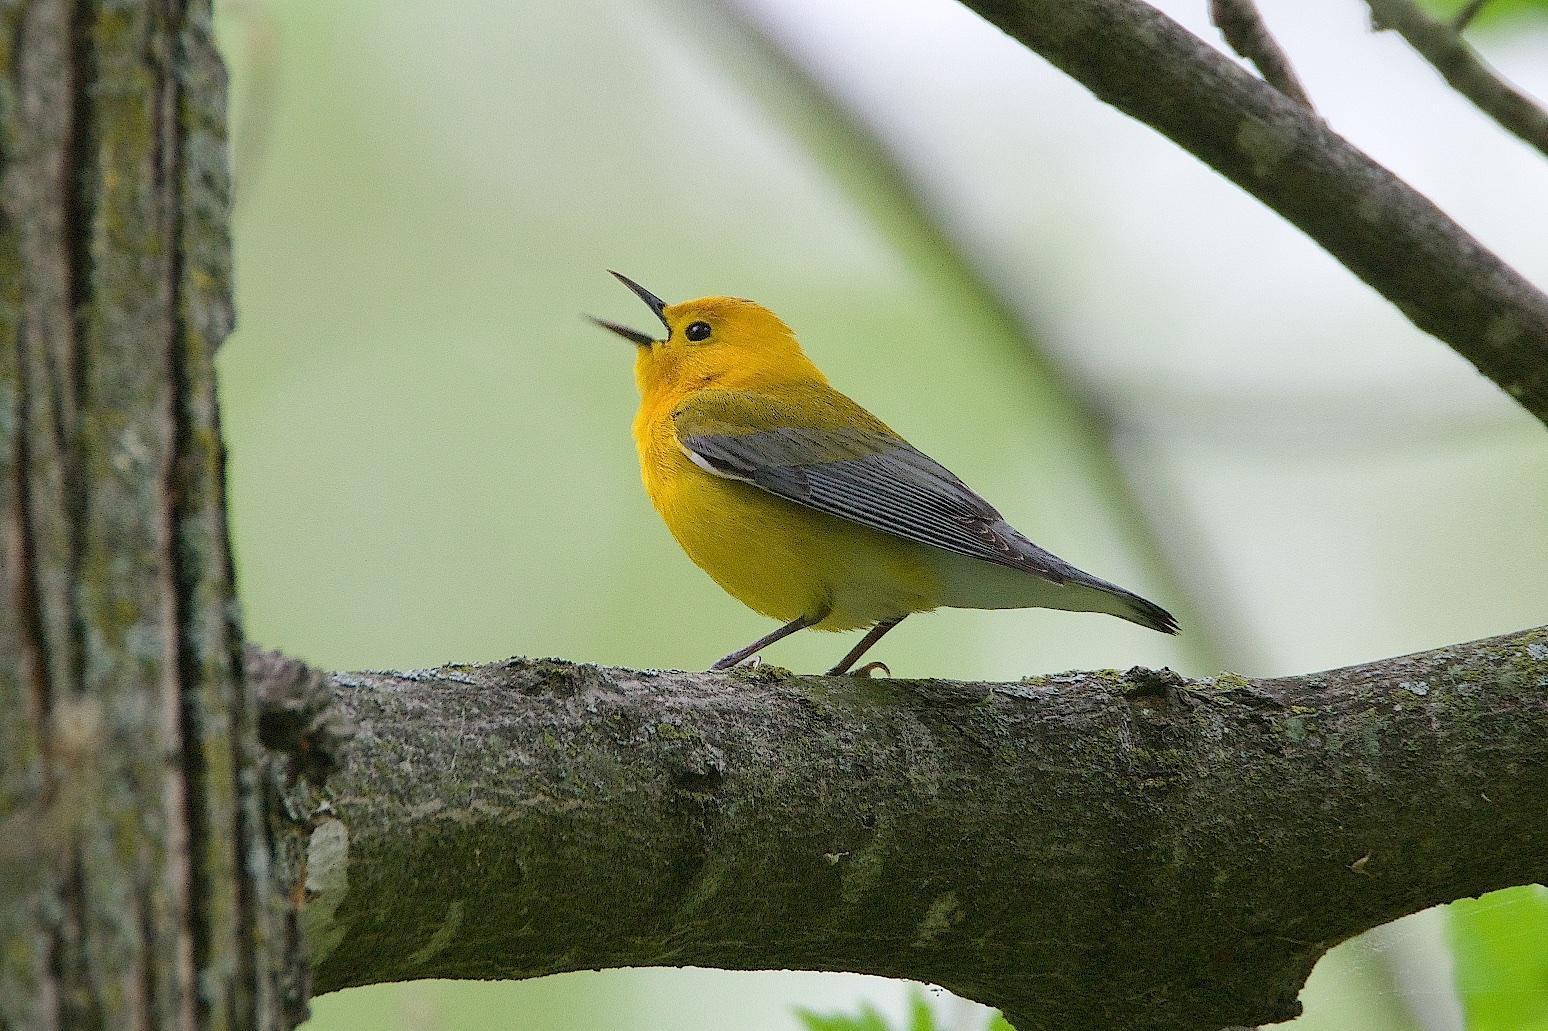 Prothonotary Warbler Photo by Gerald Hoekstra